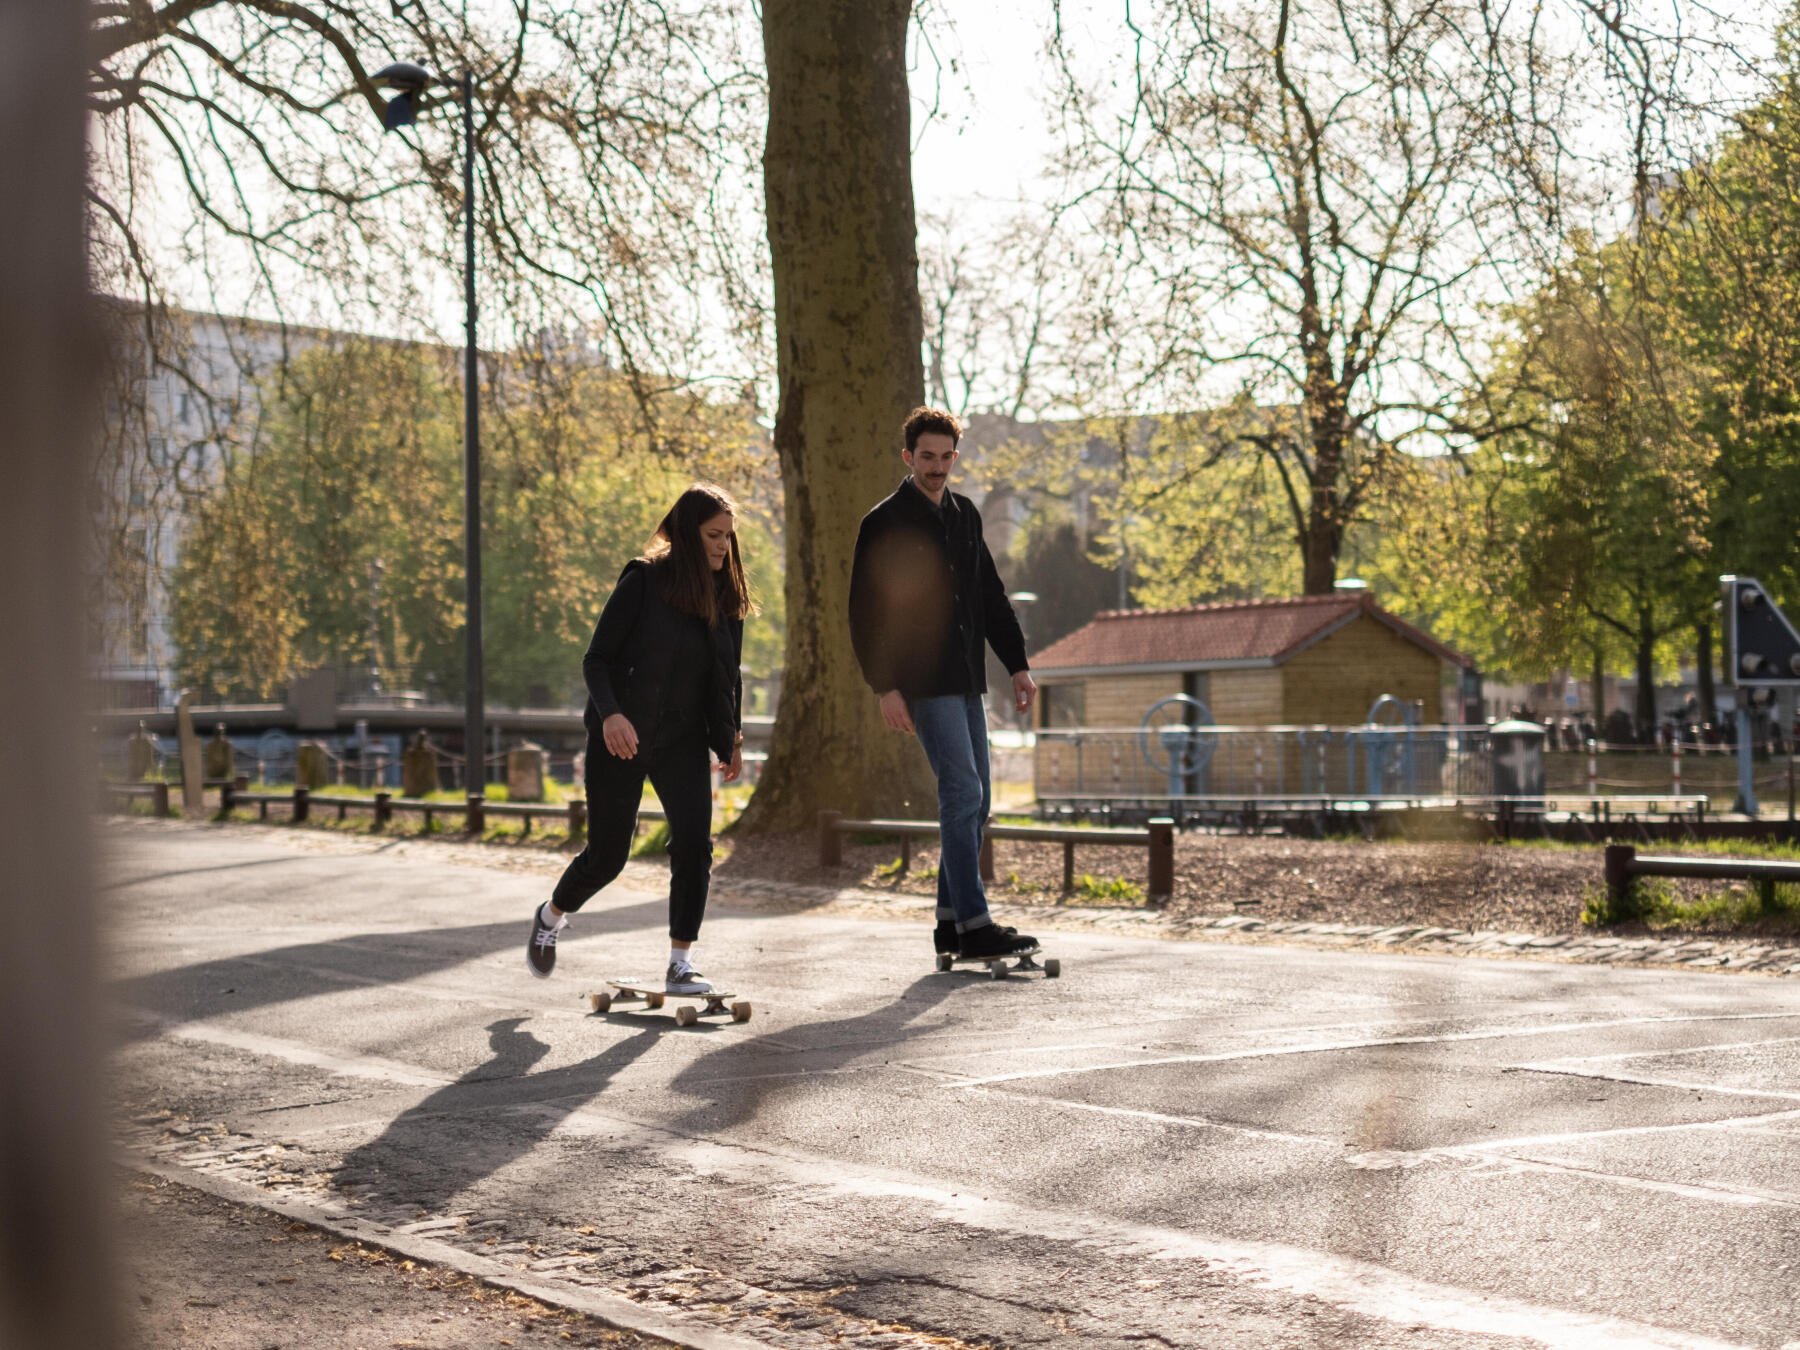 Learn to cruise: how to get around easily on a skateboard